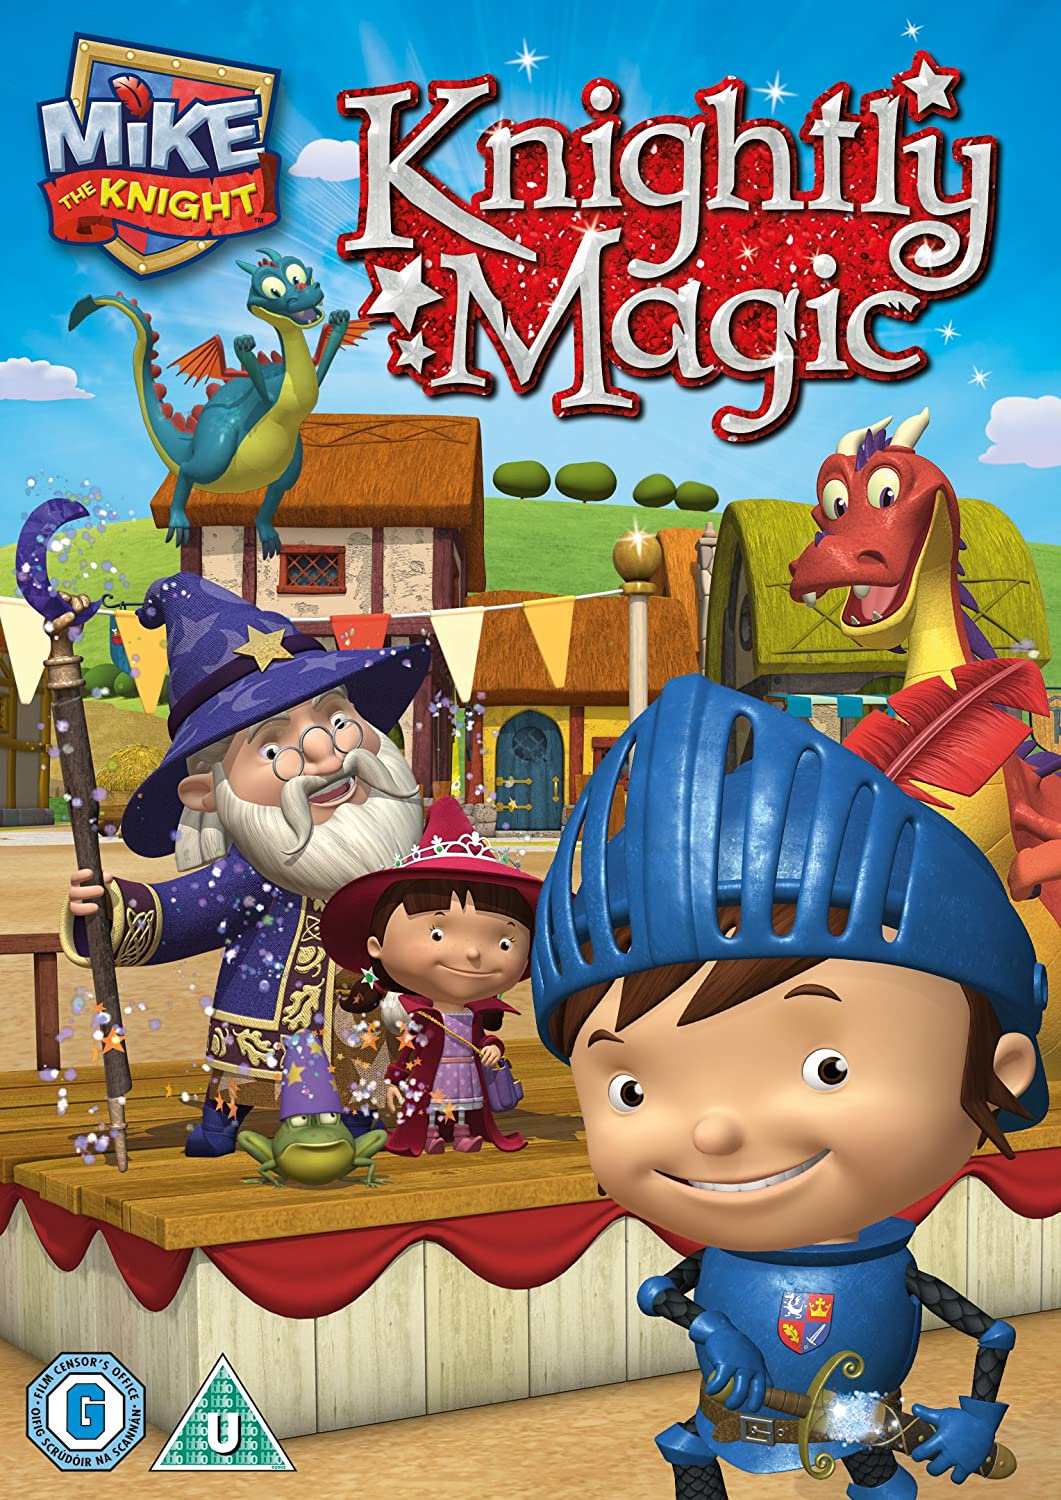 Mike The Knight: Knightly Magic [2017] - Animated [DVD]